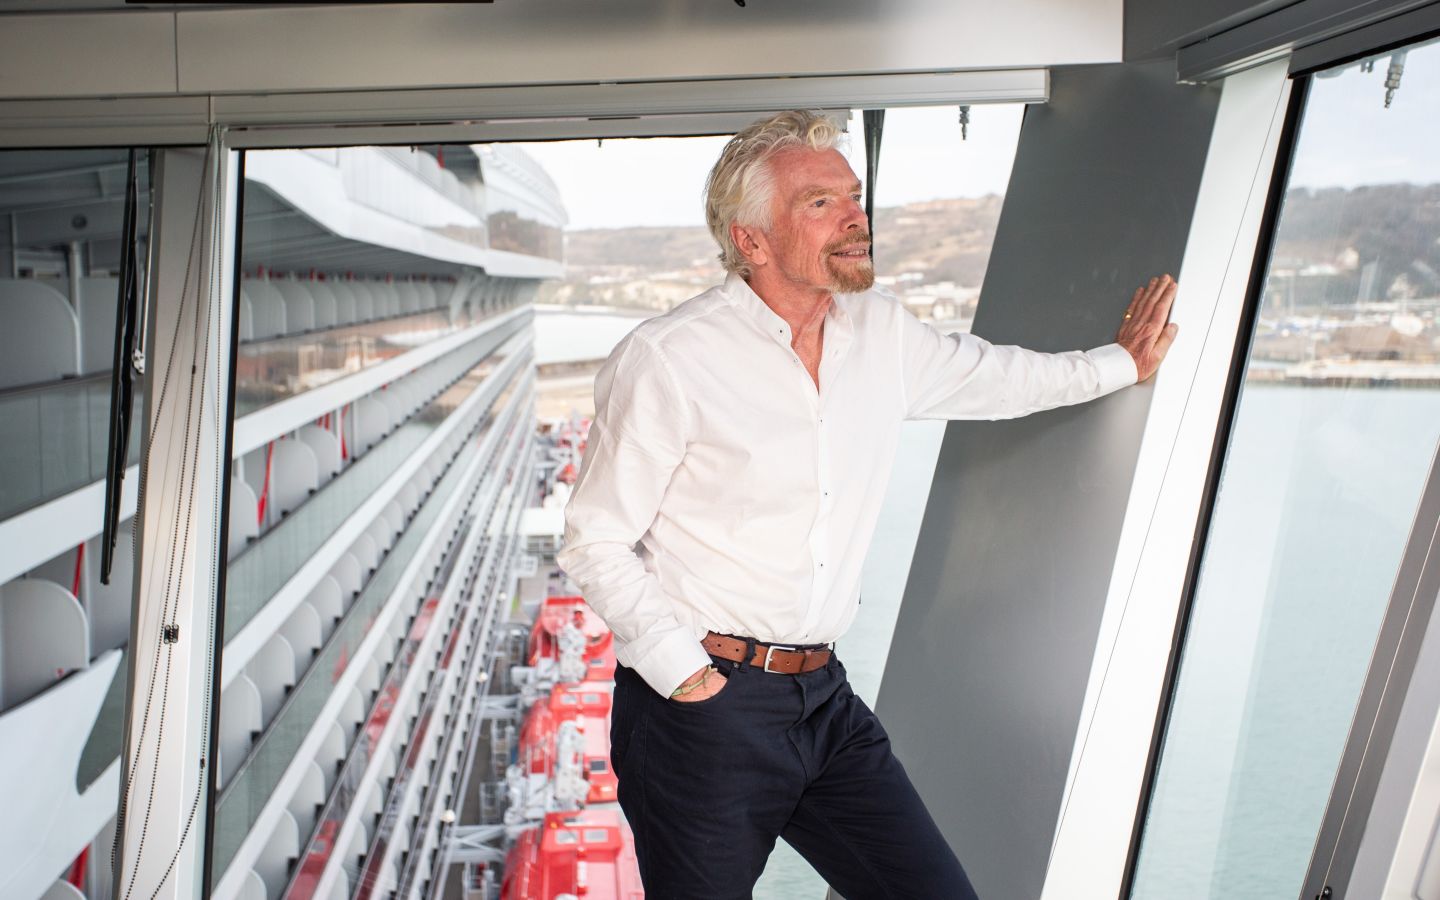 Richard Branson on board Virgin Voyages' ship, looking out of the window across the sea